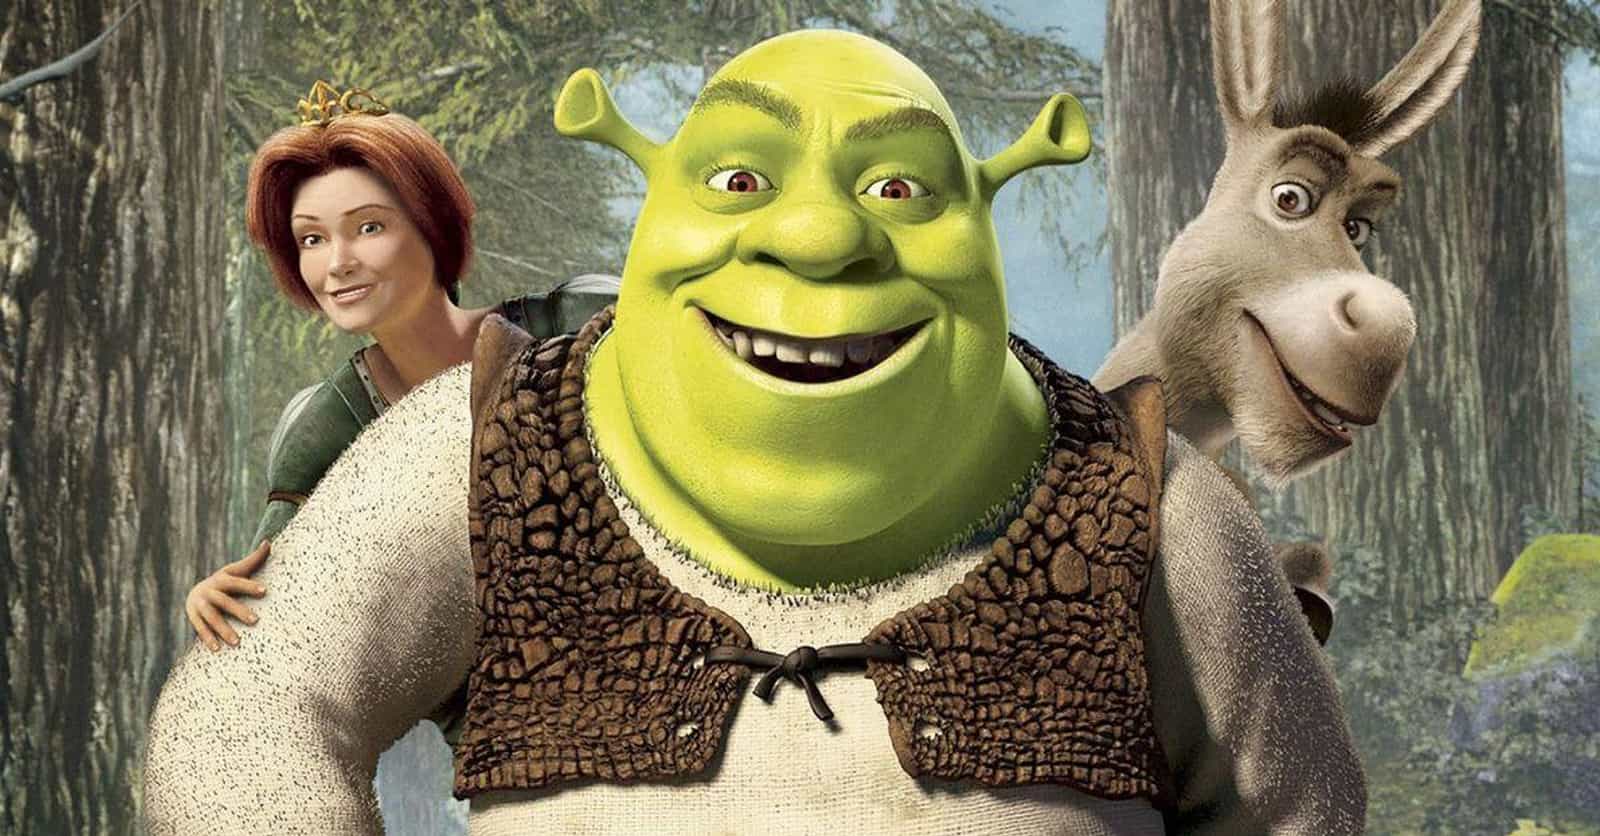 12 Things You Never Knew About The Making Of 'Shrek'